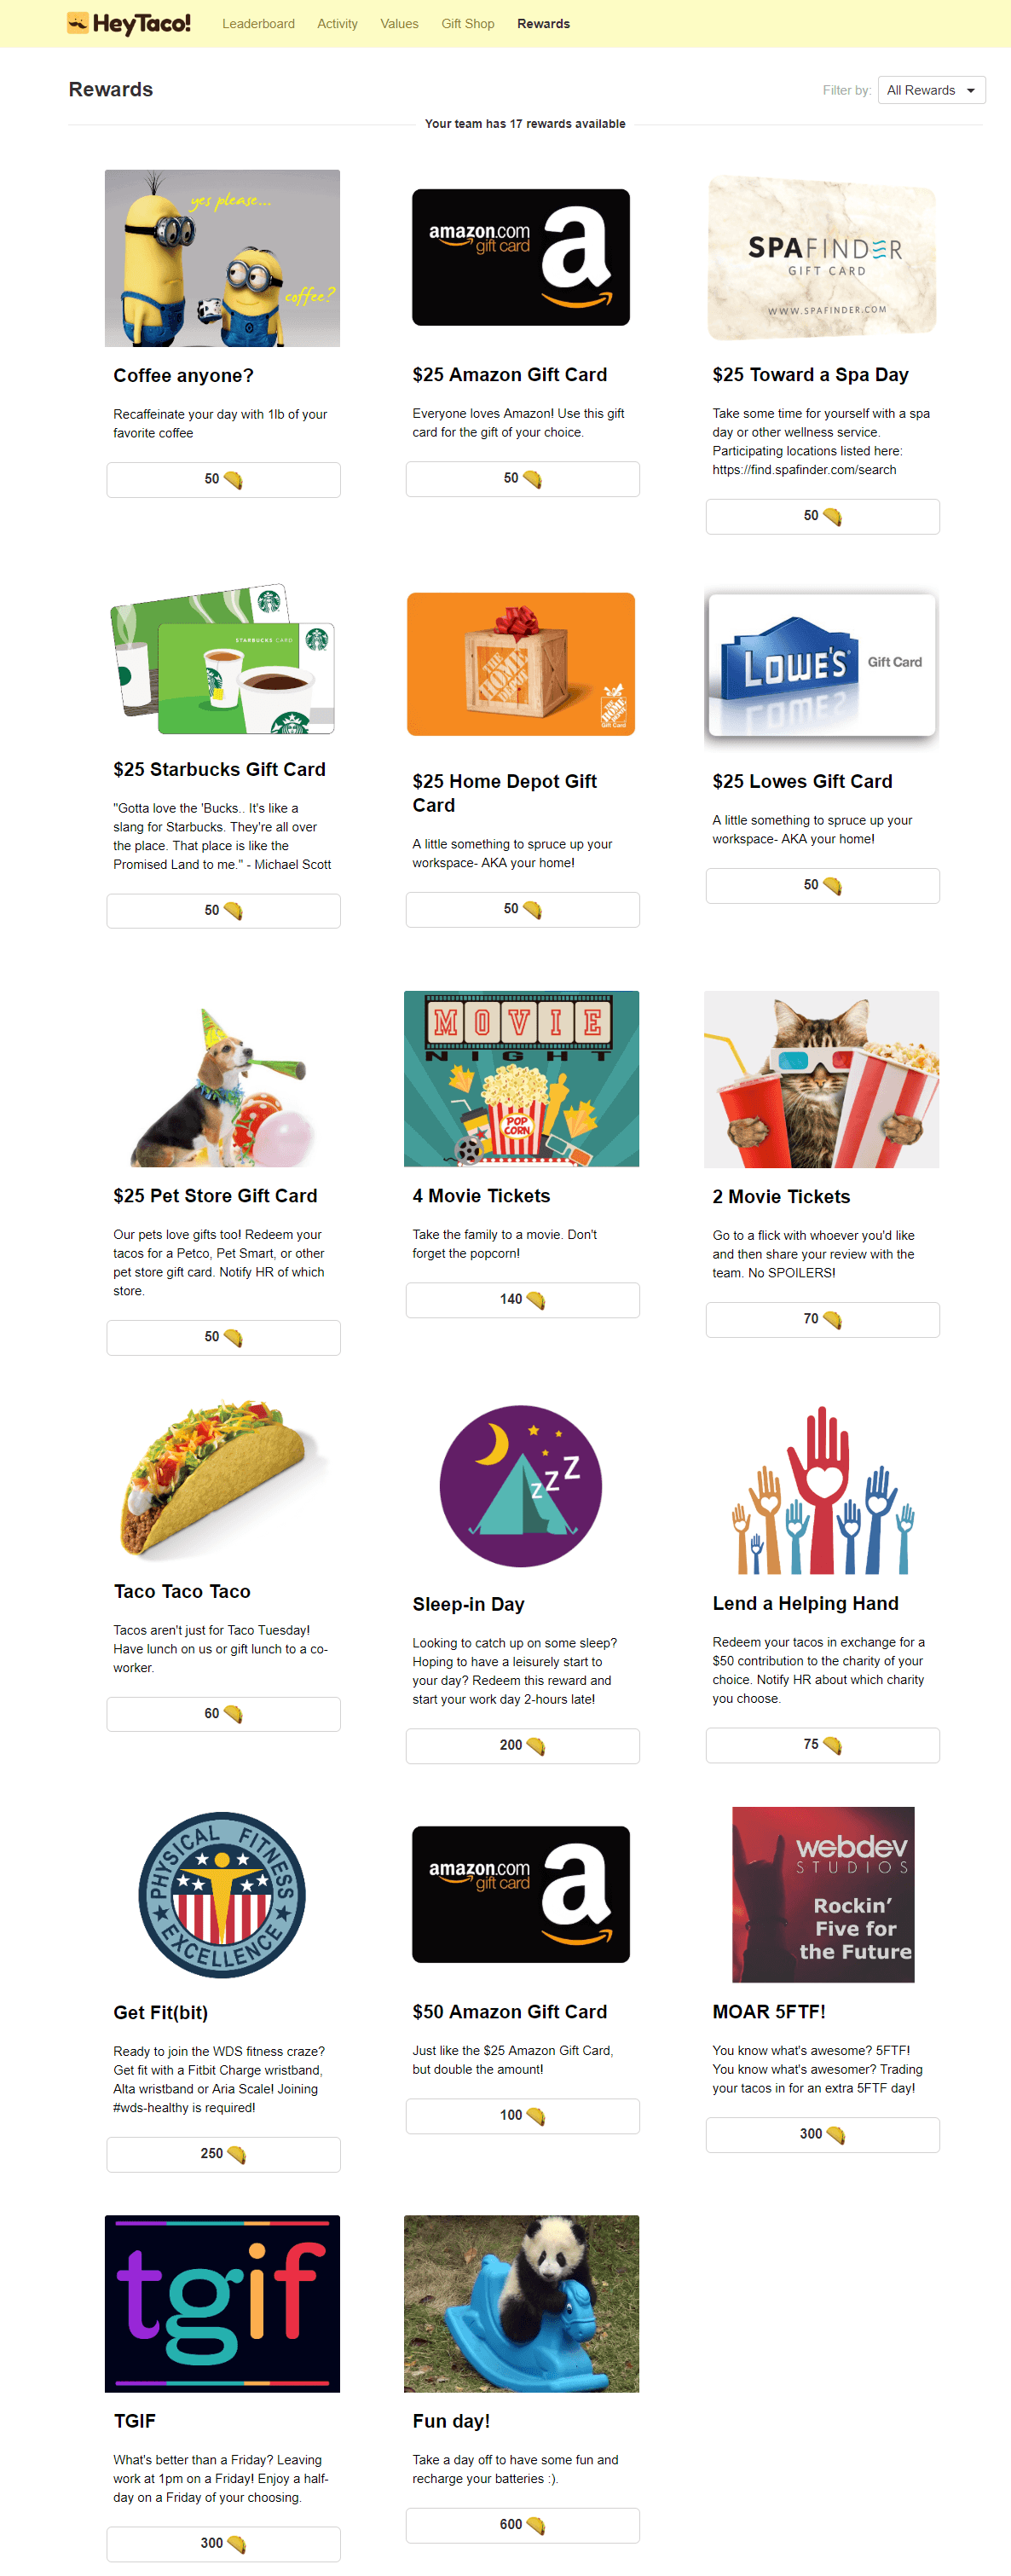 A screen grab of the WebDevStudios HeyTaco! Rewards available to employees, which includes gift cards, movie tickets, coffee, taco lunch, a day off from work, and more.